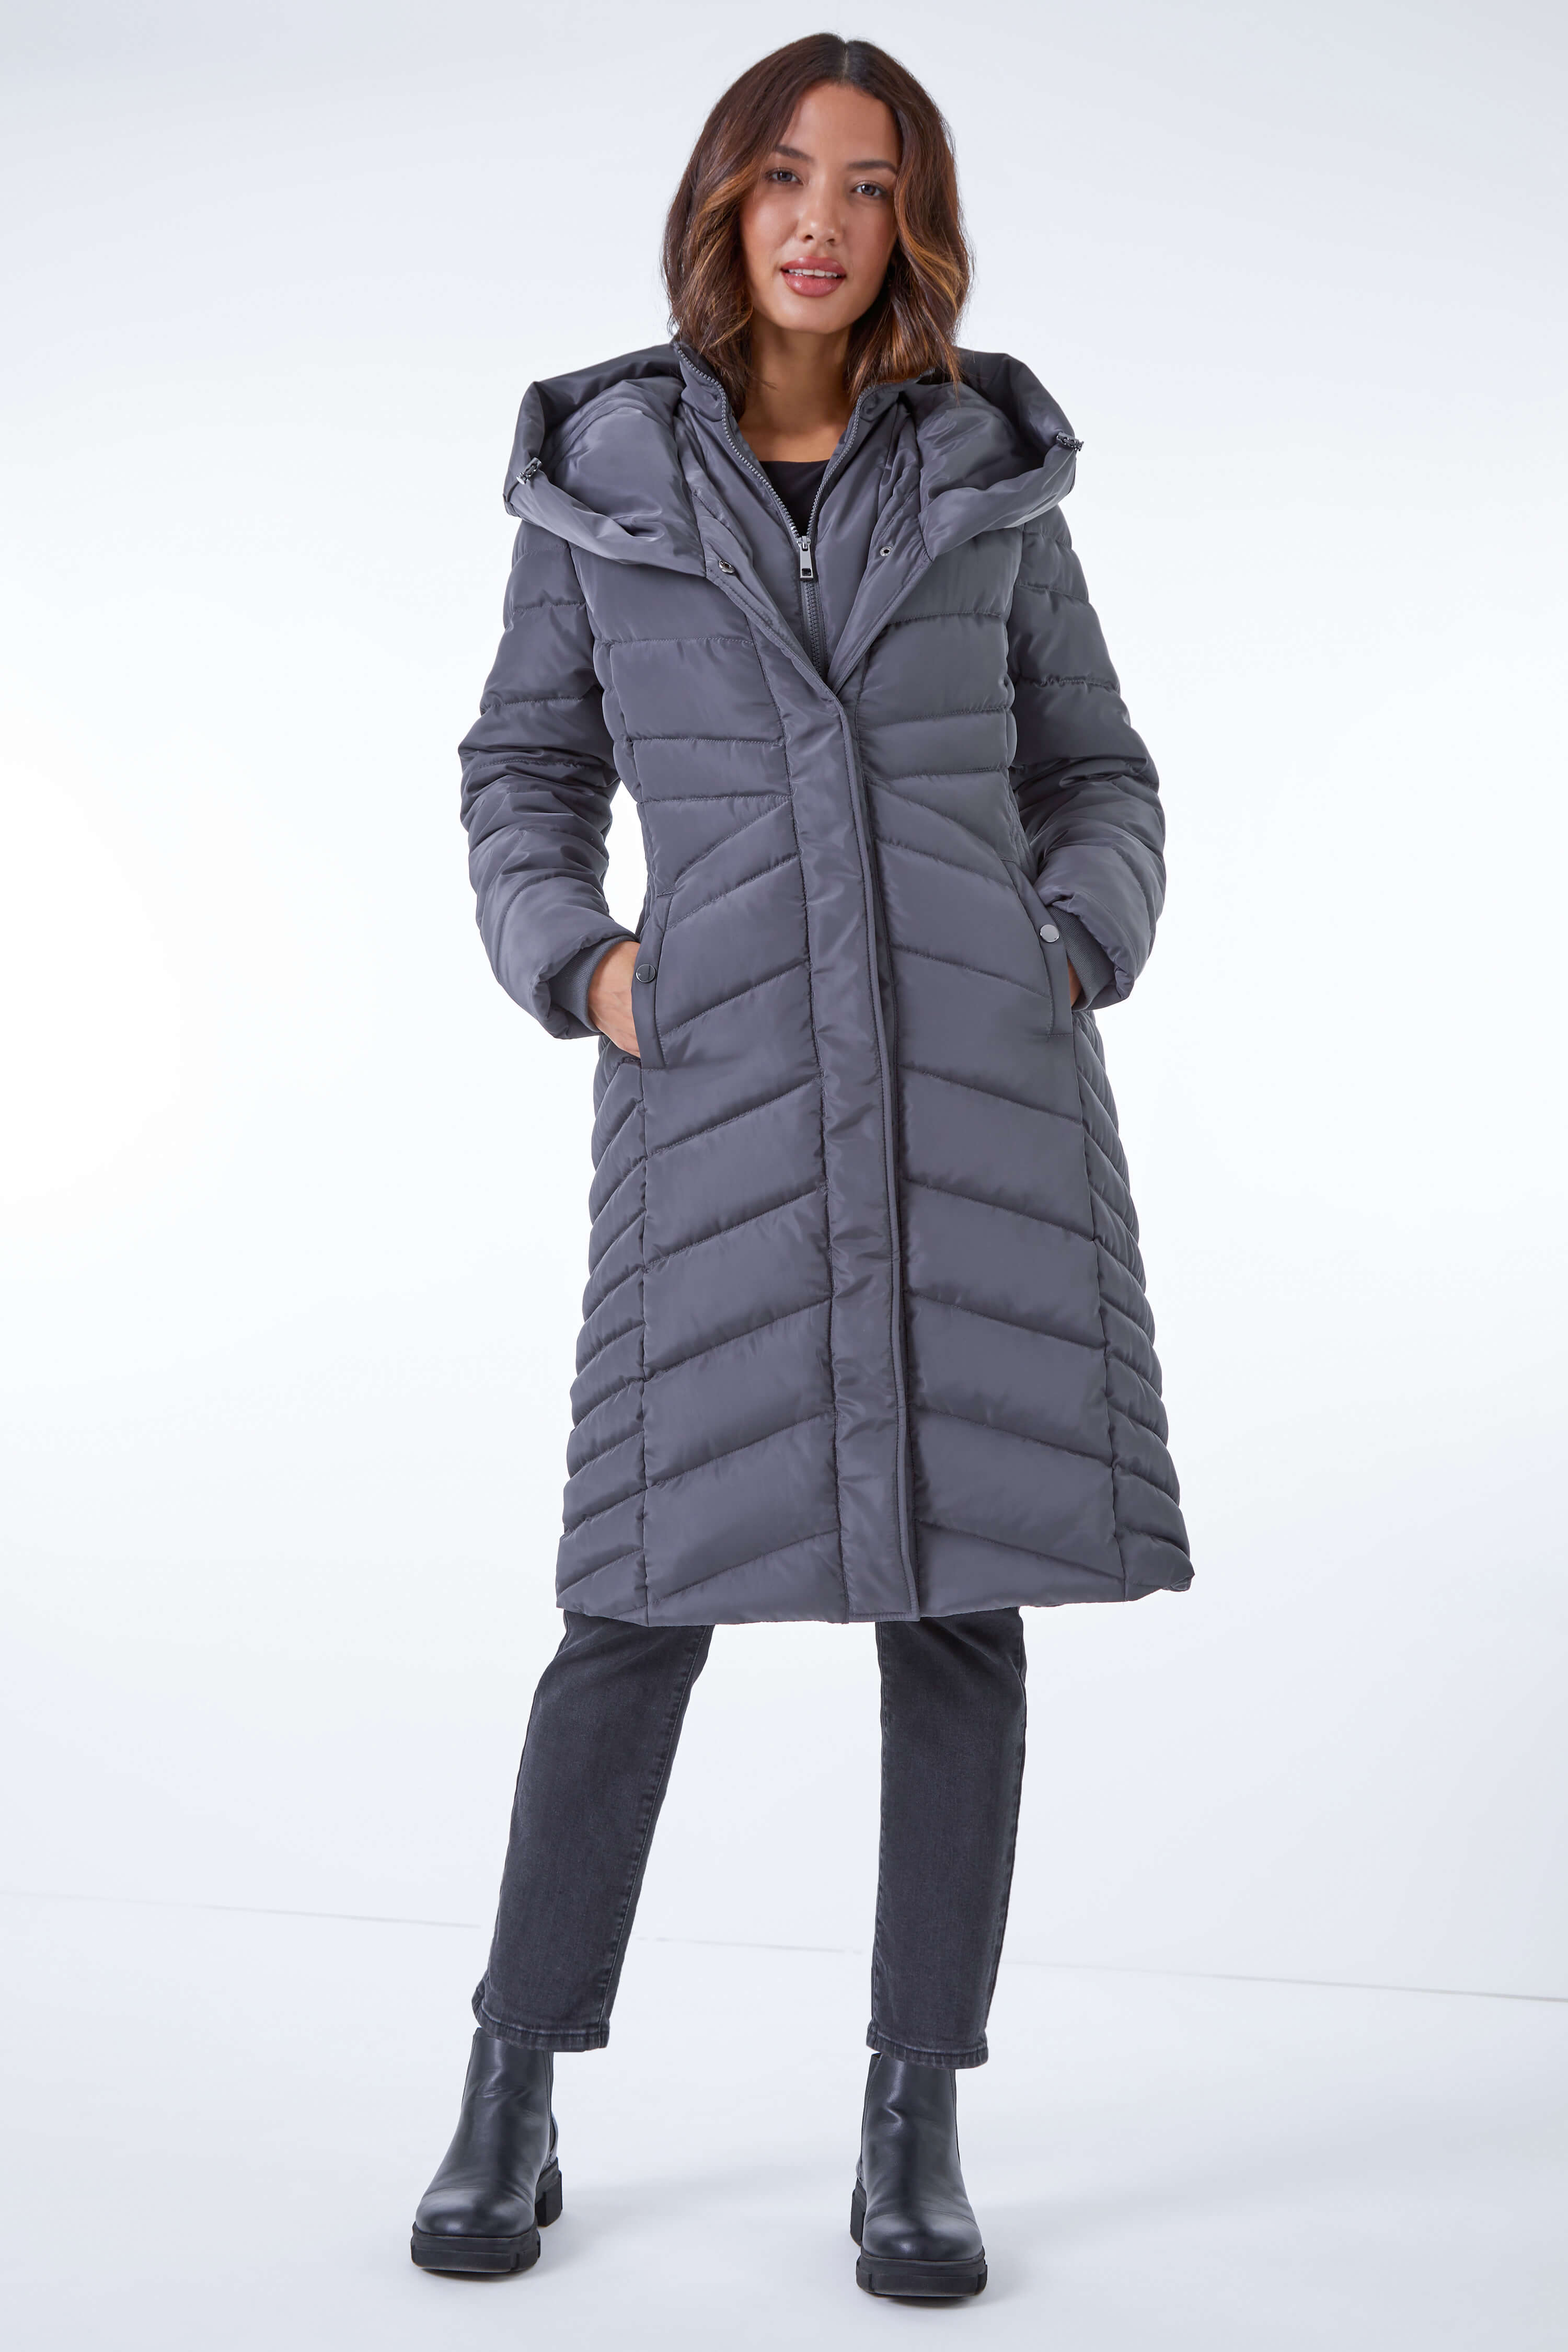 Charcoal Hooded Quilted Coat, Image 2 of 5